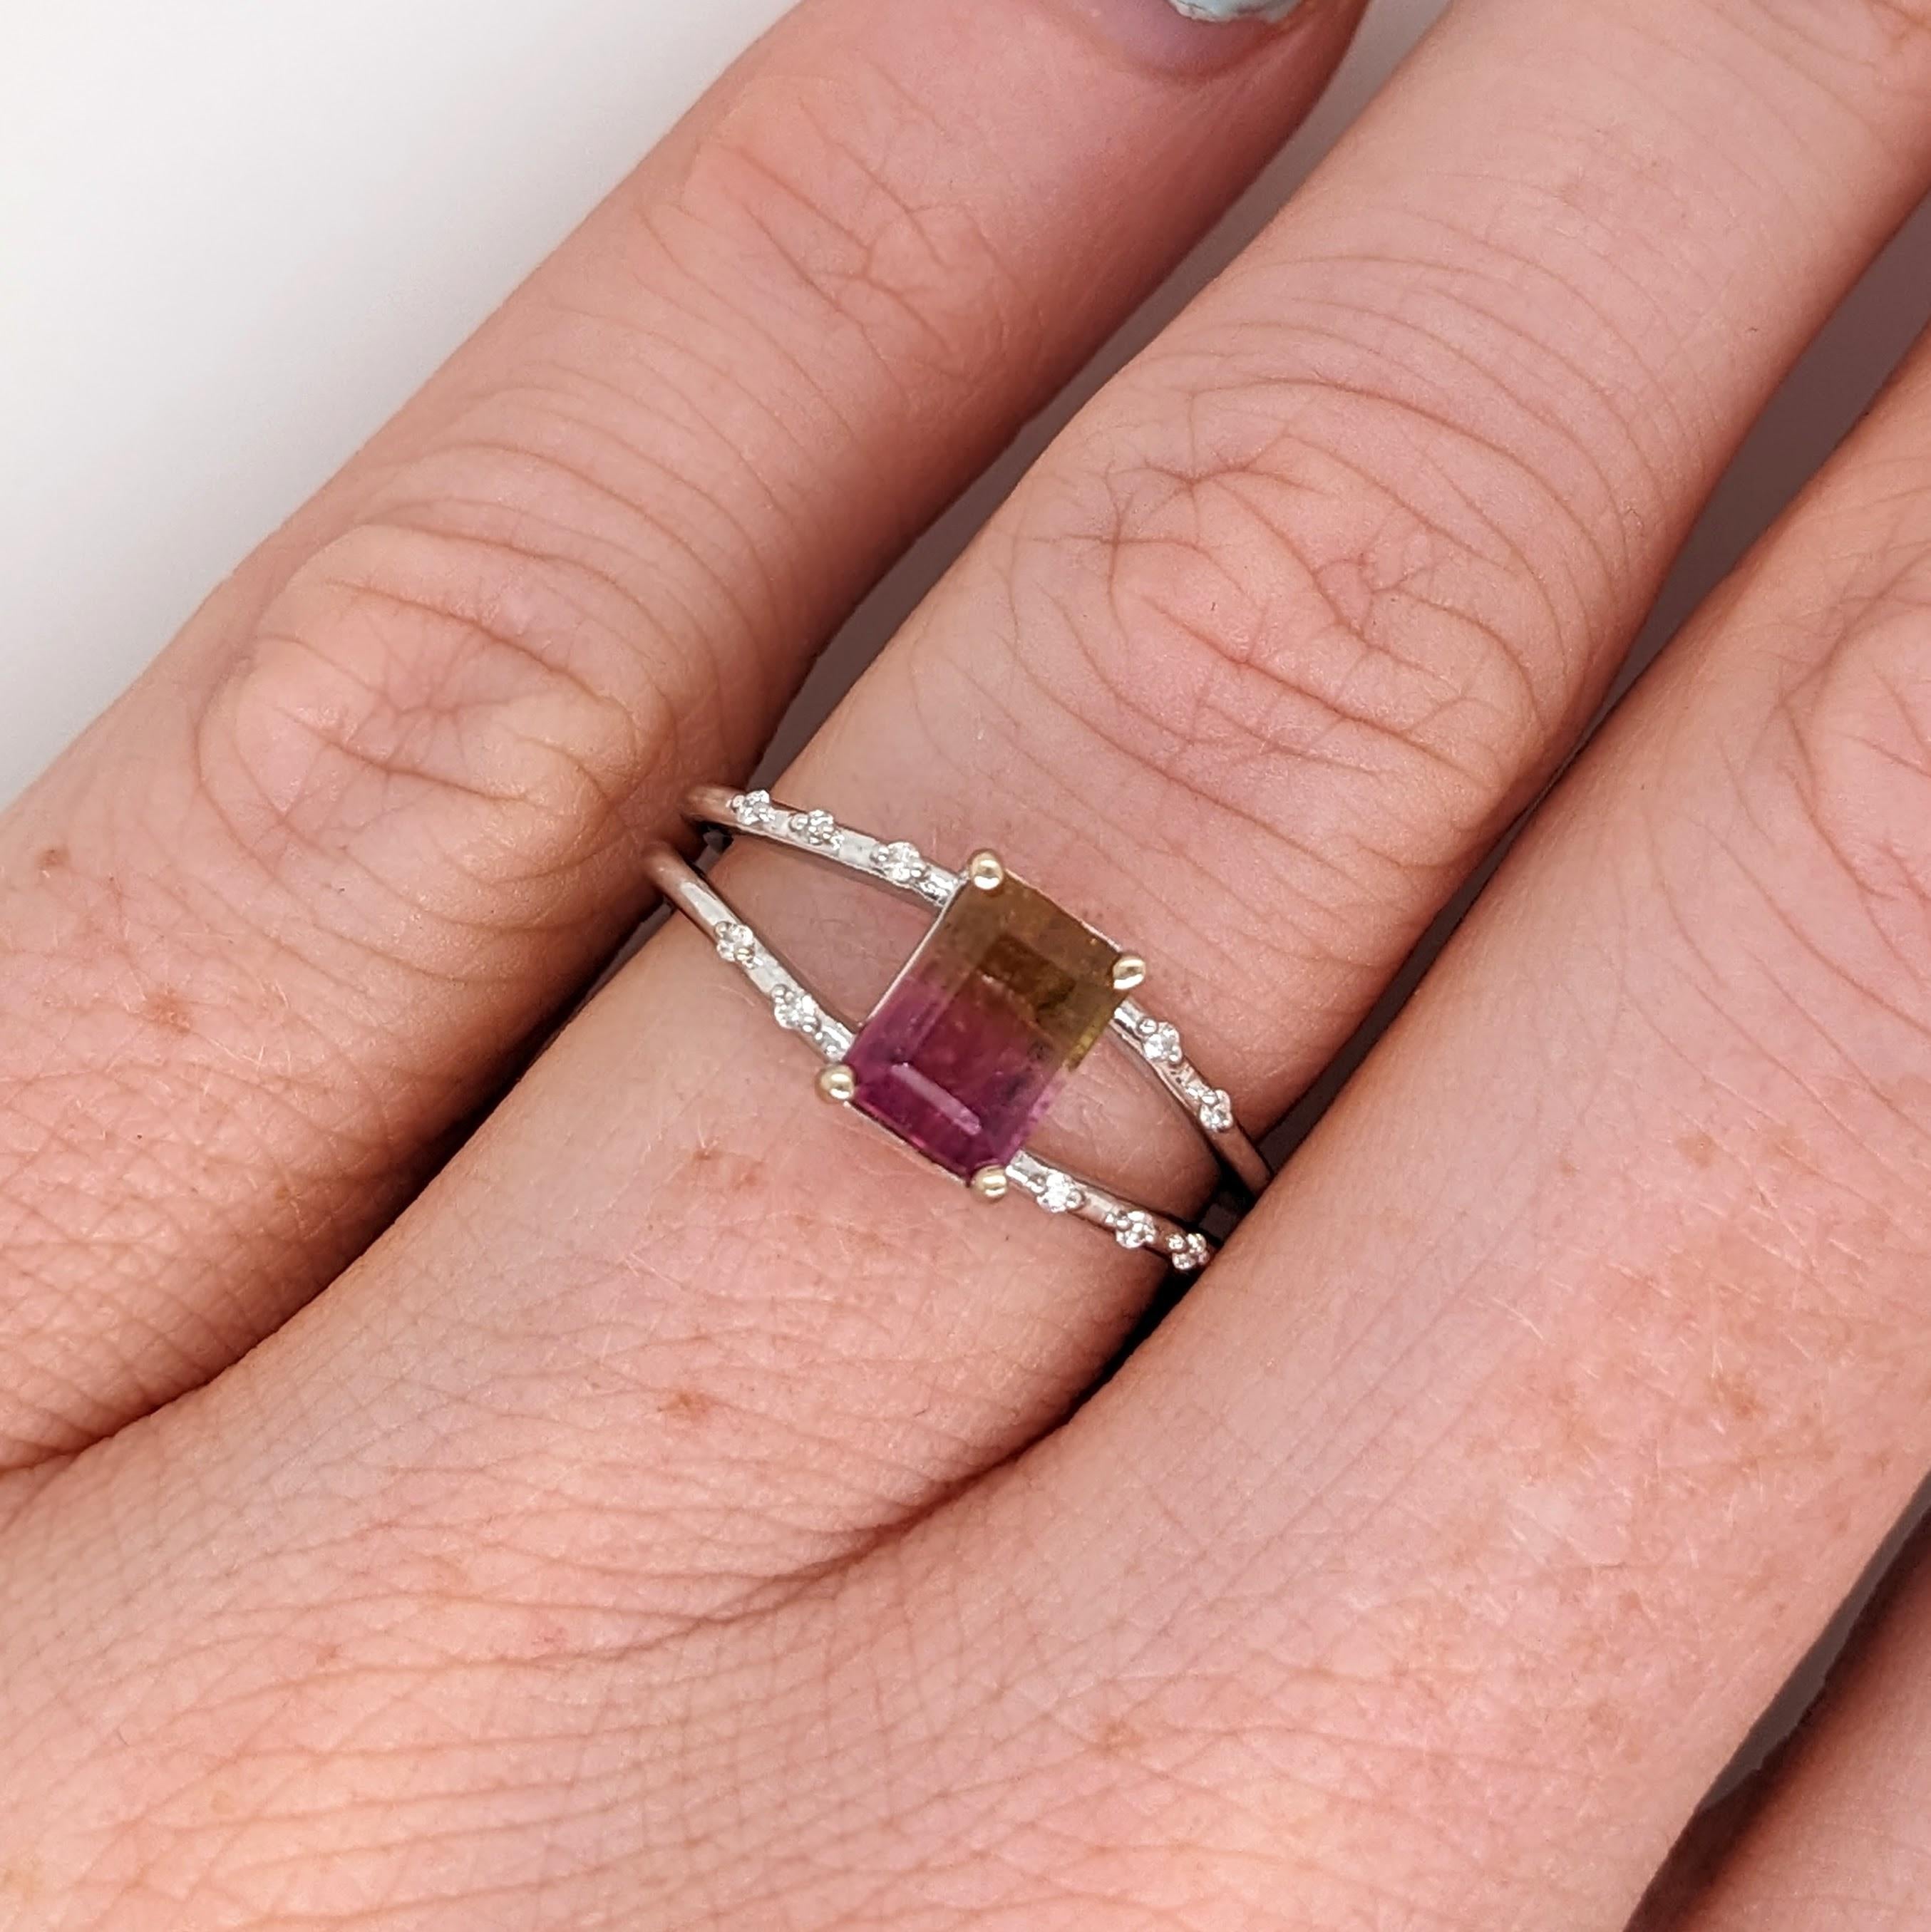 This beautiful ring features a 1.08 carat bicolor emerald cut tourmaline gemstone with natural earth mined diamonds, all set in solid 14K gold. This ring can be a lovely October birthstone gift for your loved ones! 

Specifications

Item Type: